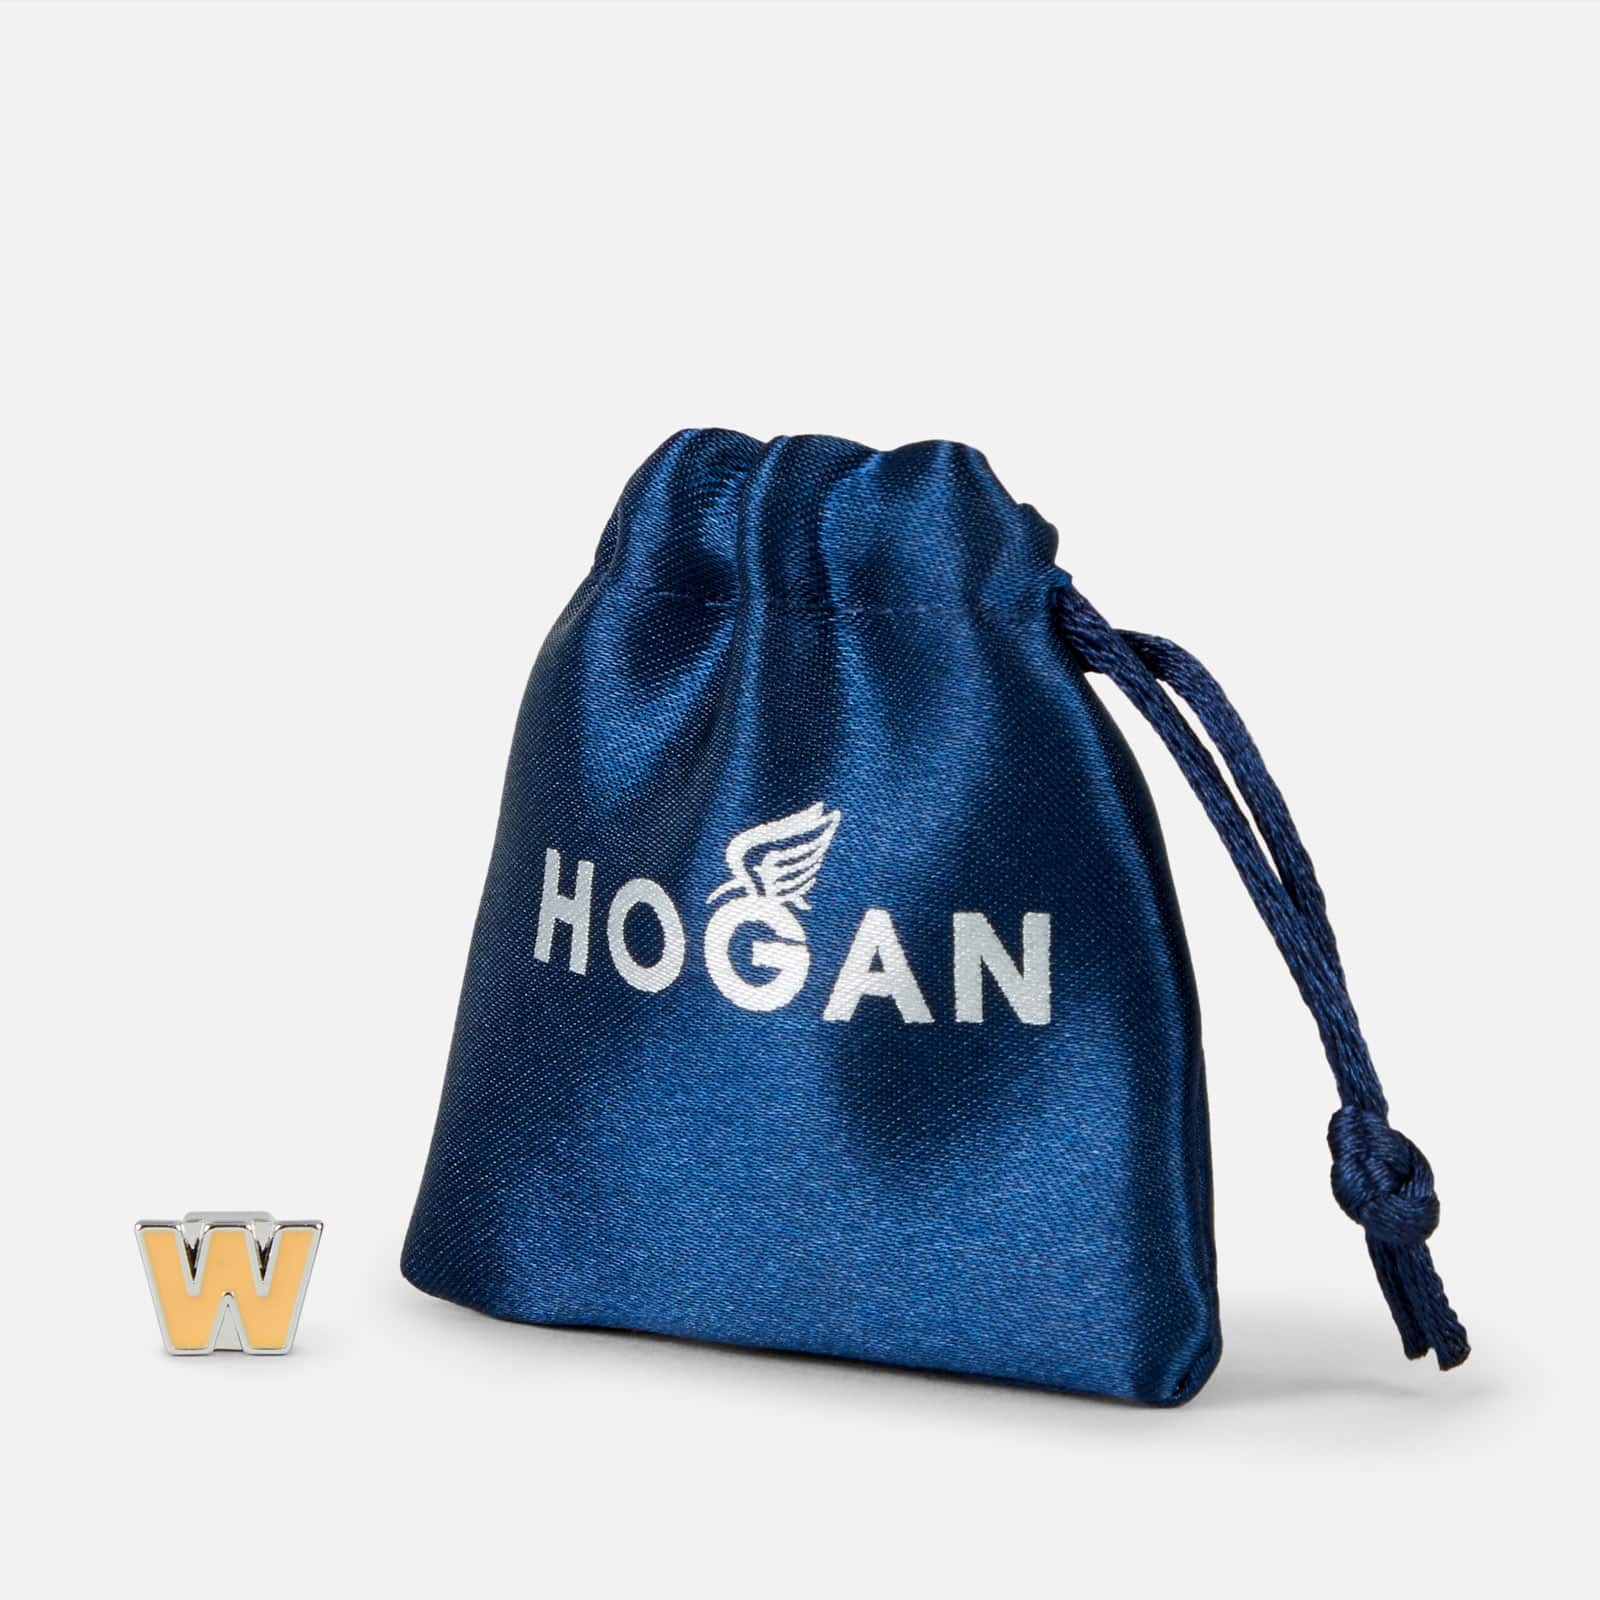 Hogan By You - Shoelace Bead Yellow Gold - 2